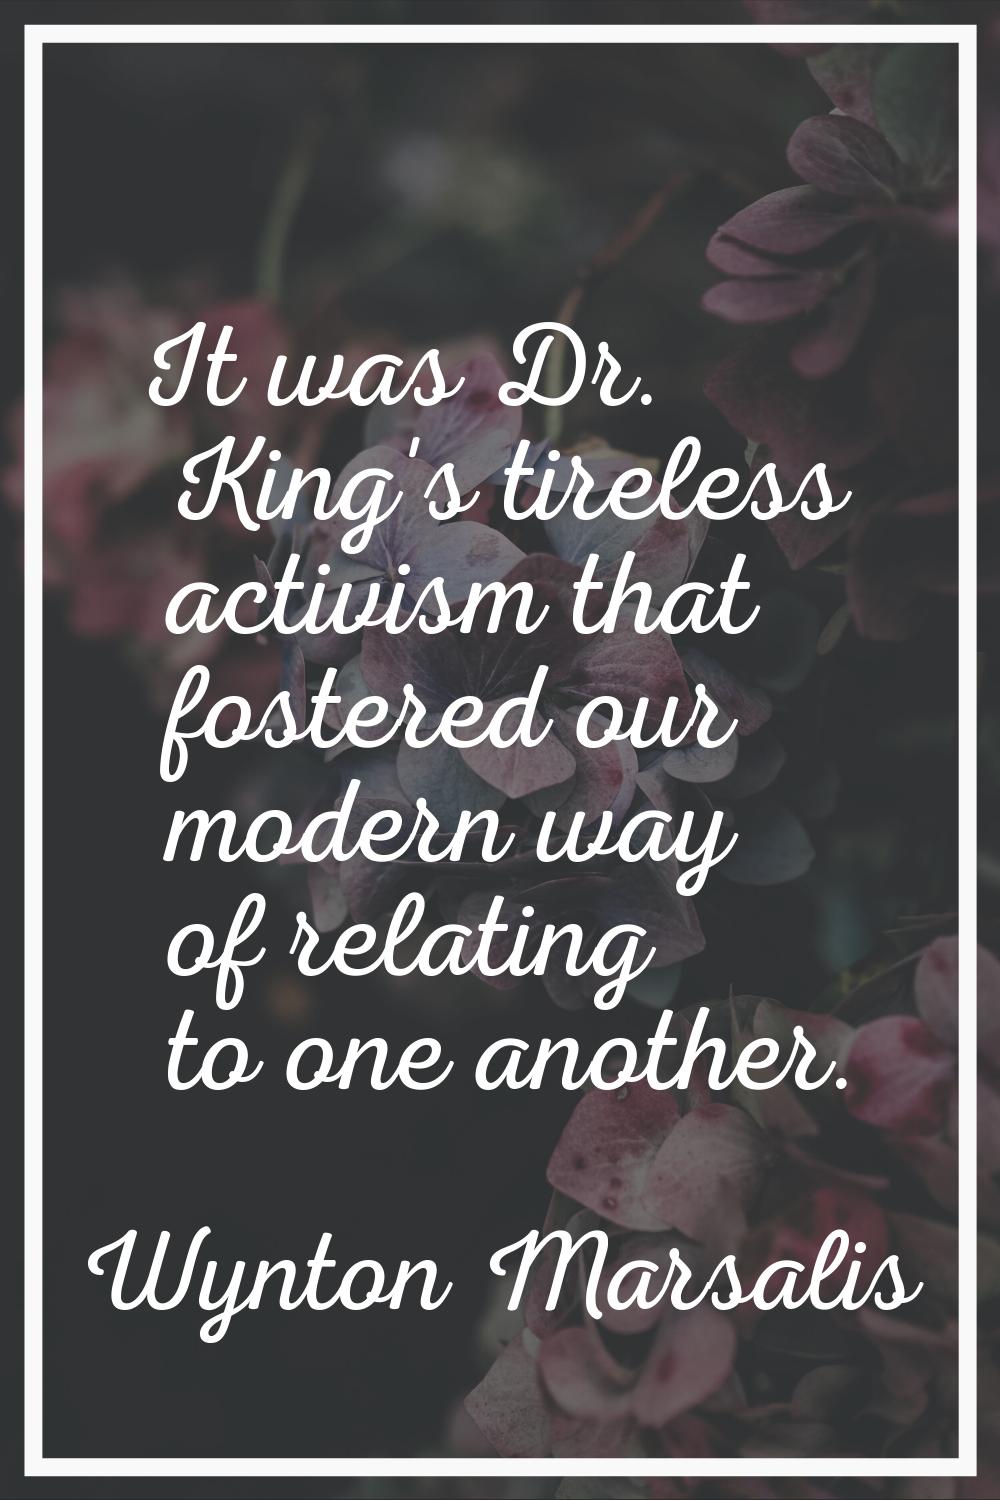 It was Dr. King's tireless activism that fostered our modern way of relating to one another.